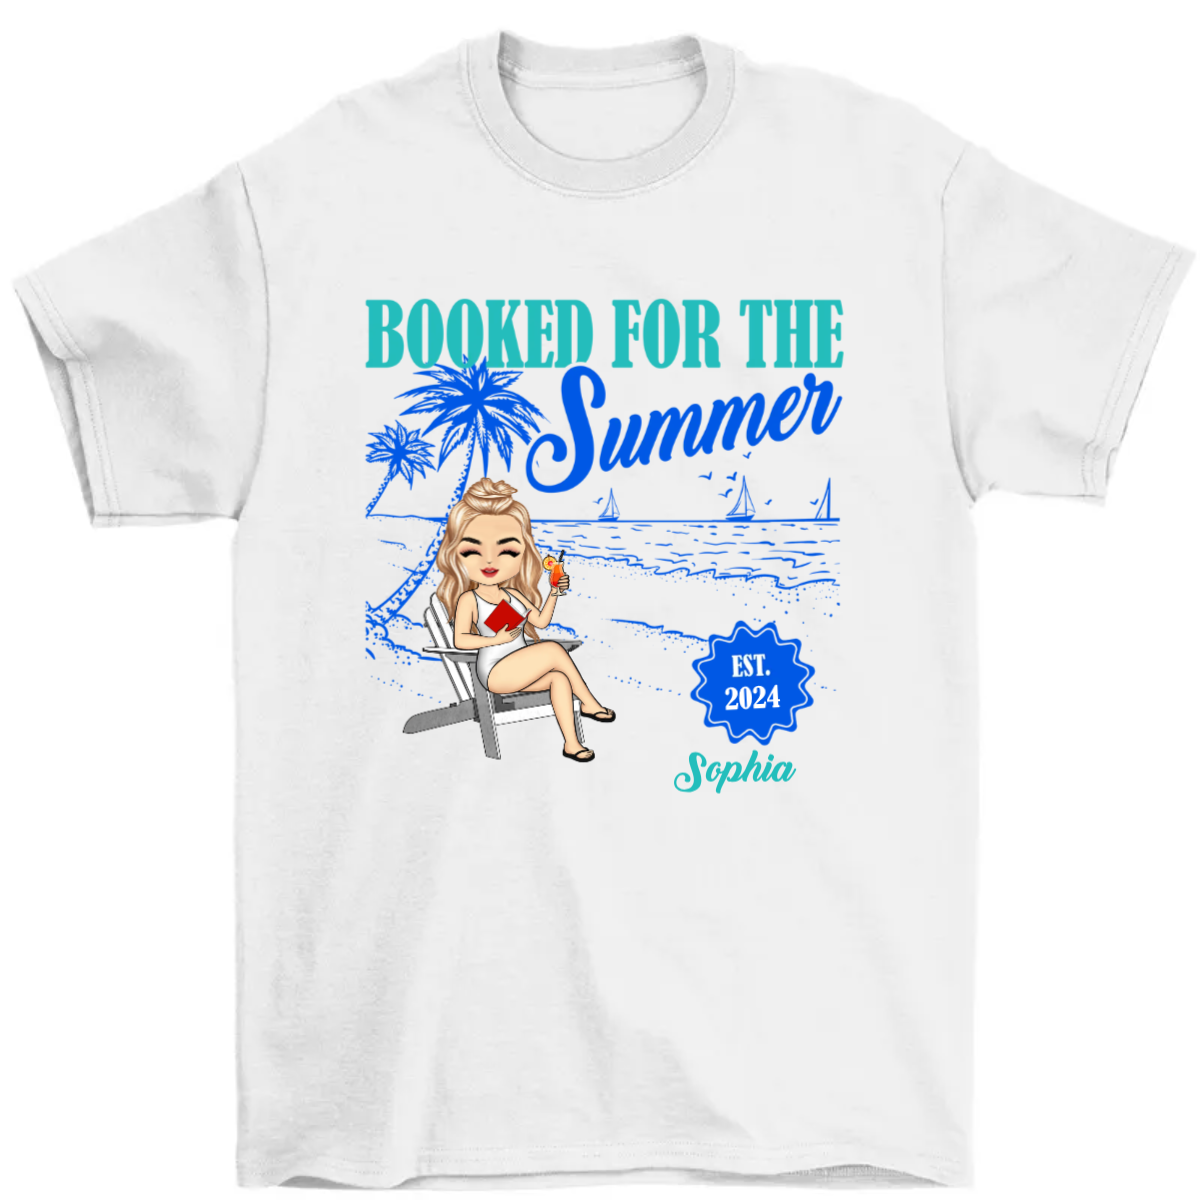 Booked For The Summer - Personalized T Shirt